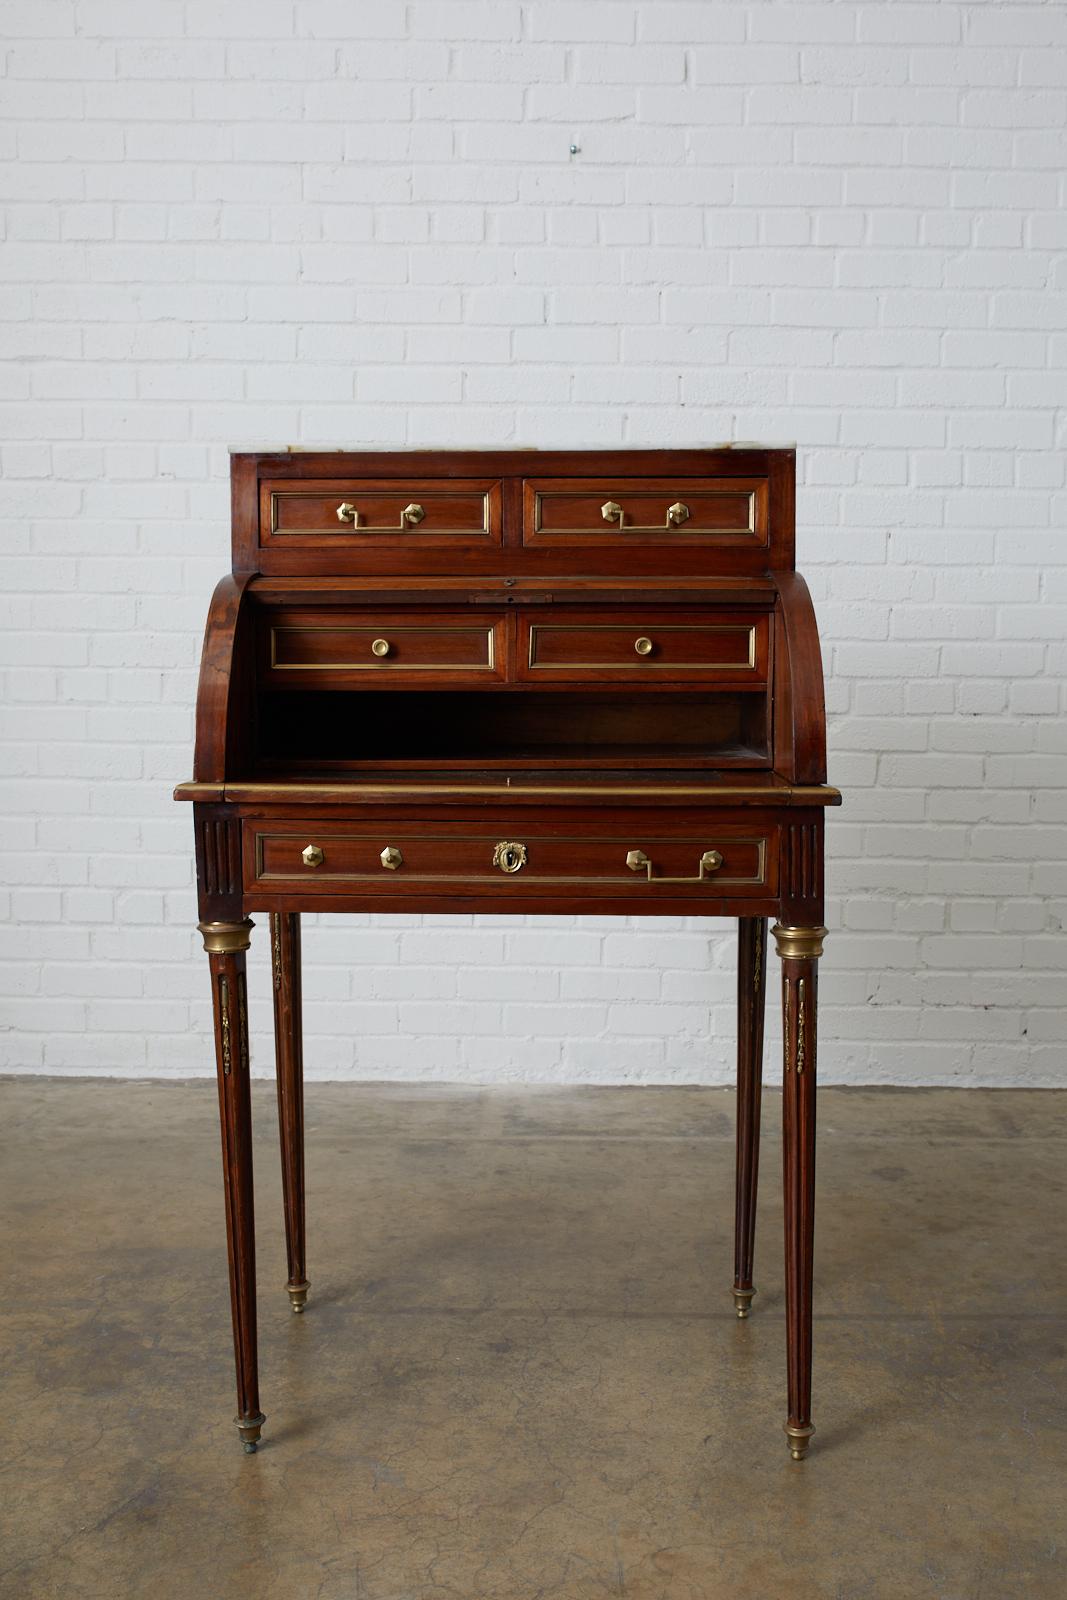 Elegant French ladies bureau, writing table, or desk made in the grand Louis XVI taste. Features a roll top cylinder style case topped with a piece of Carrara marble. Made in the style of a 